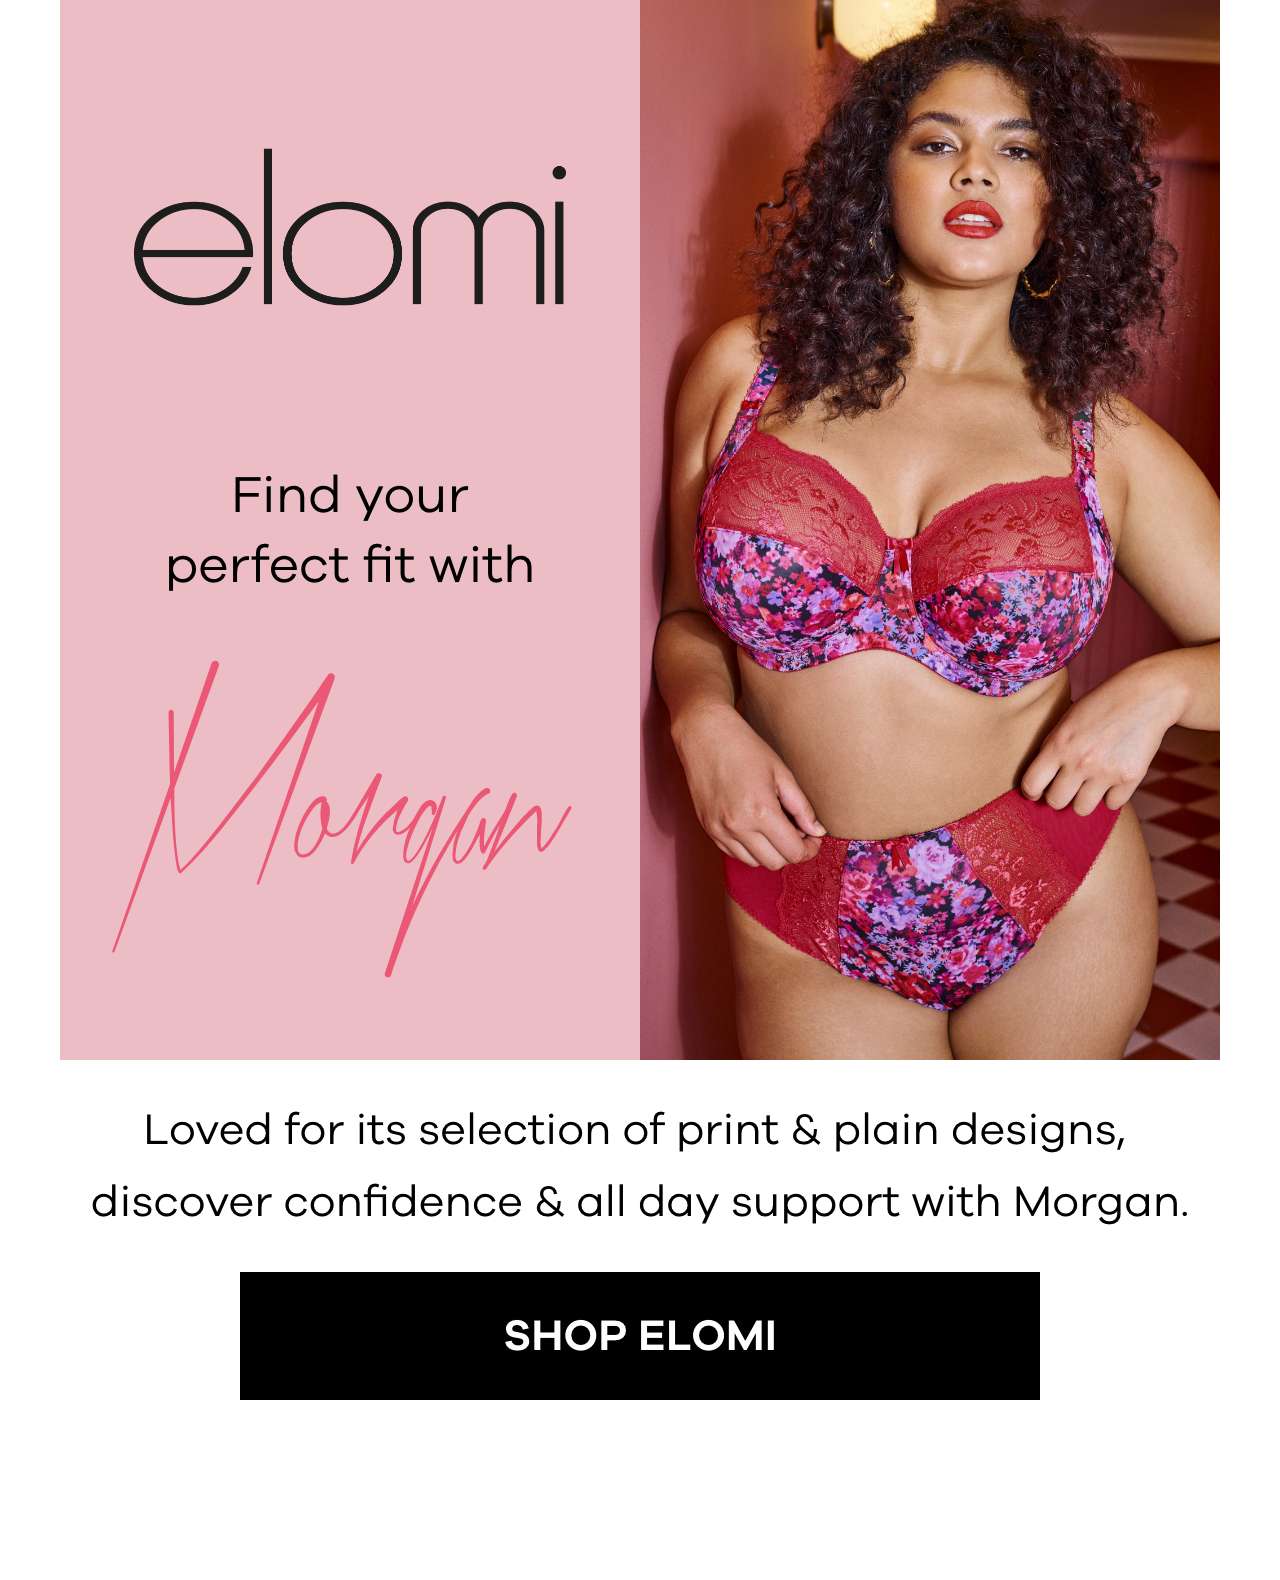  Find your perfect fit with Morgan. Loved for its selection of print & plain designs, discover confidence & all day support with Morgan. Shop Elomi